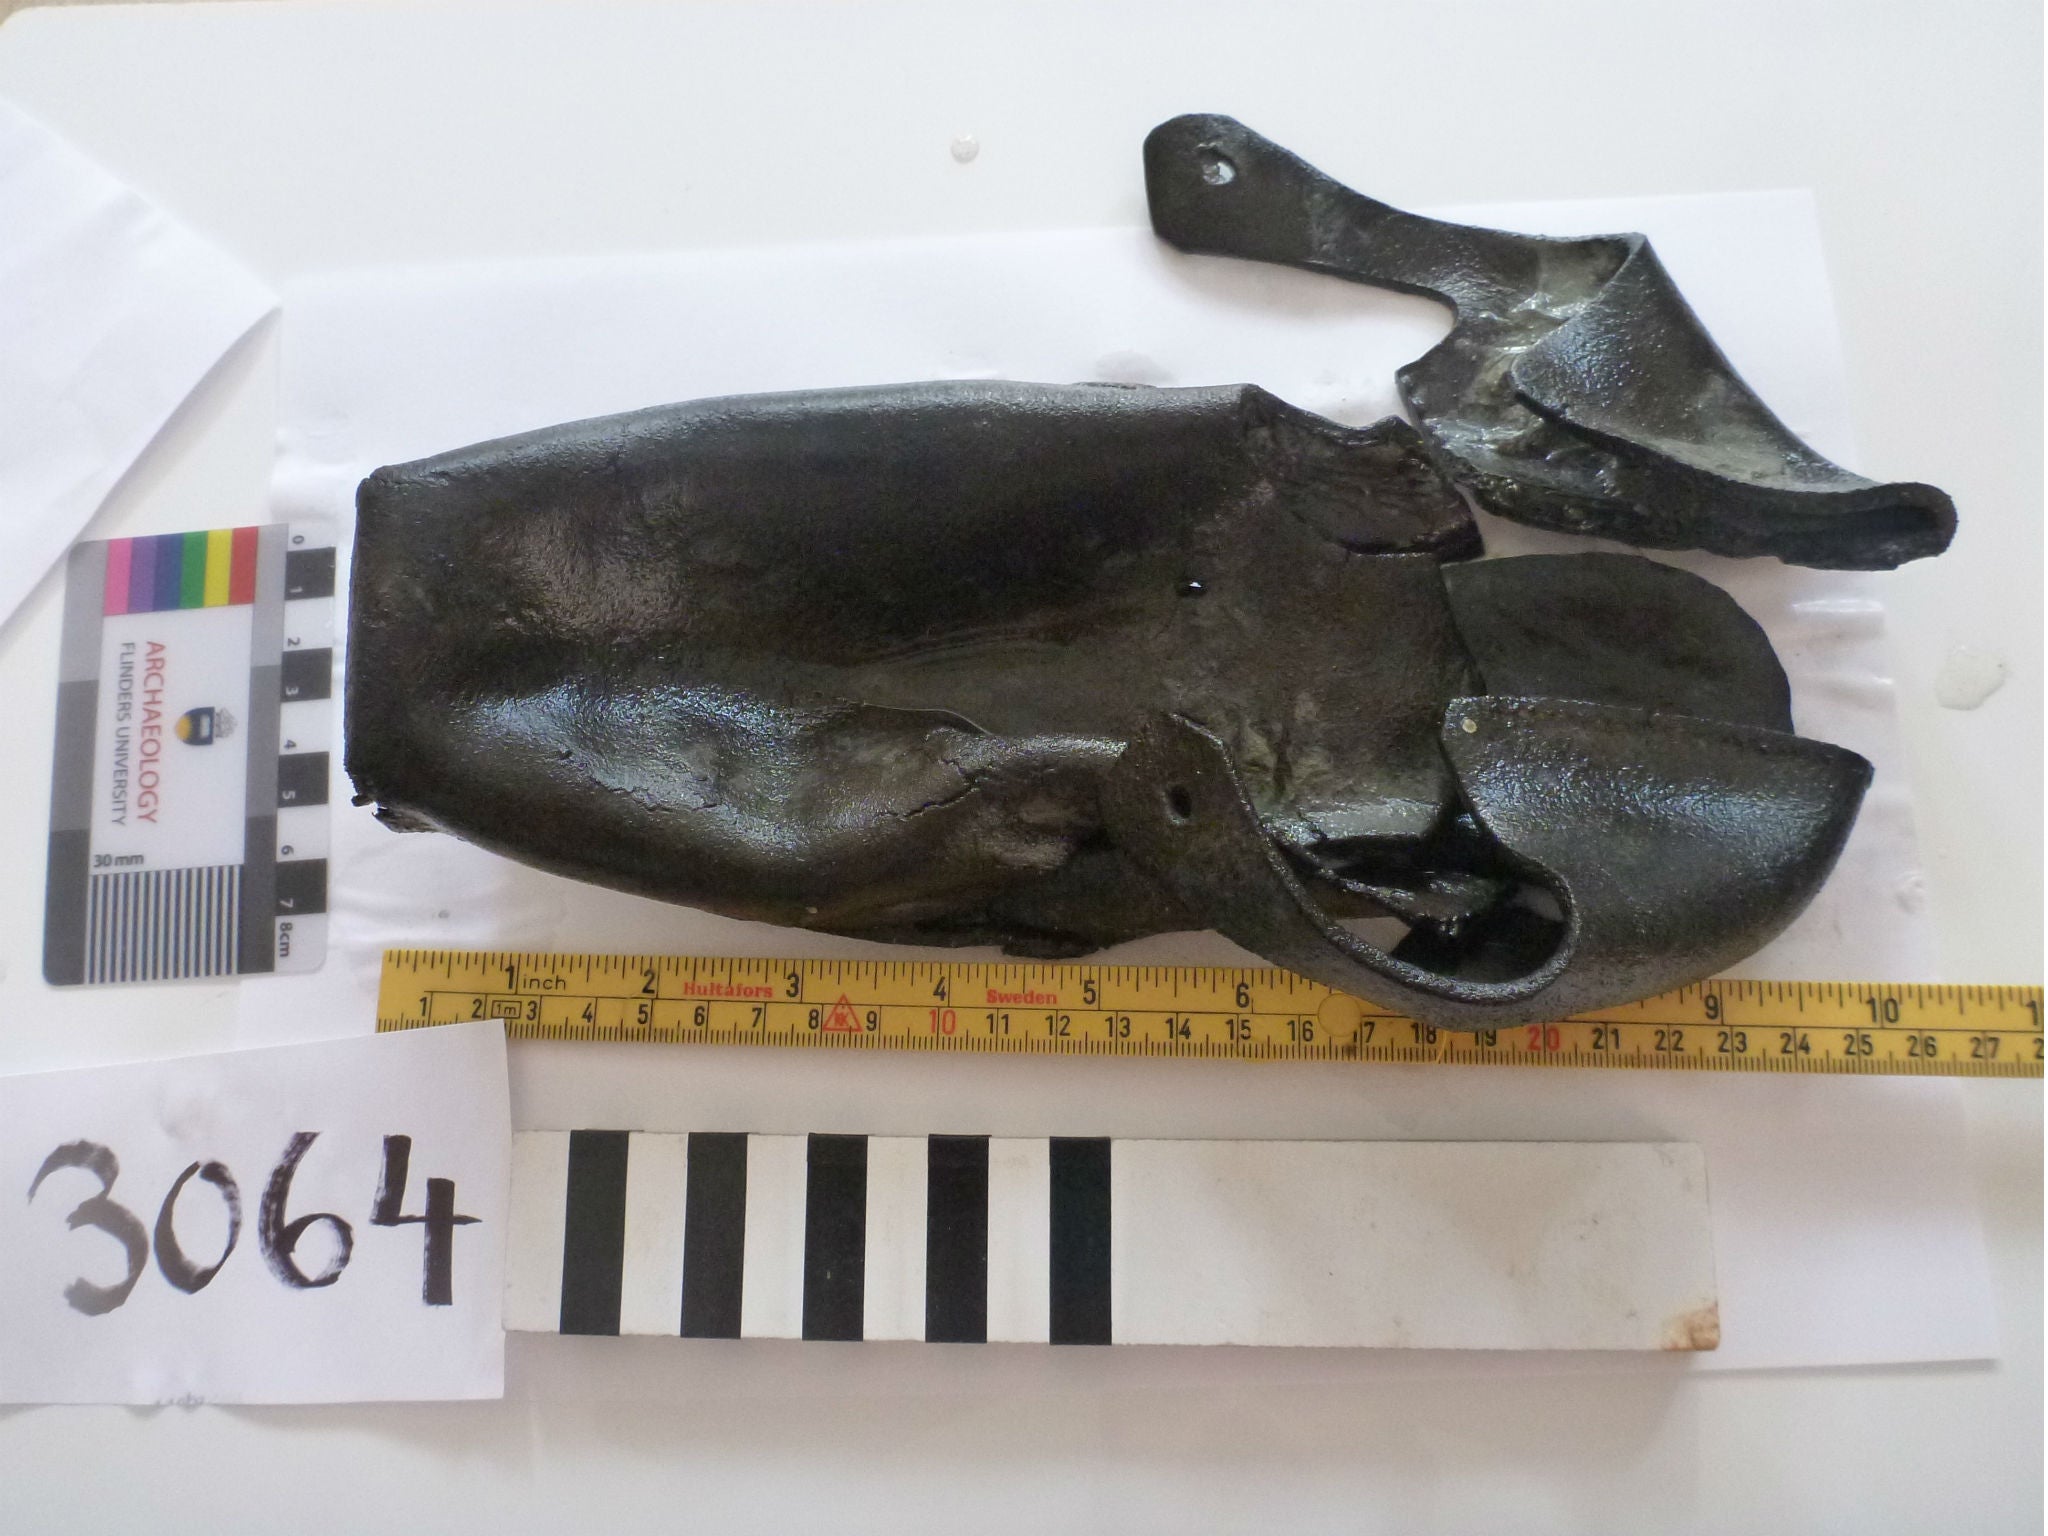 A latchet shoe recovered from the London wreck